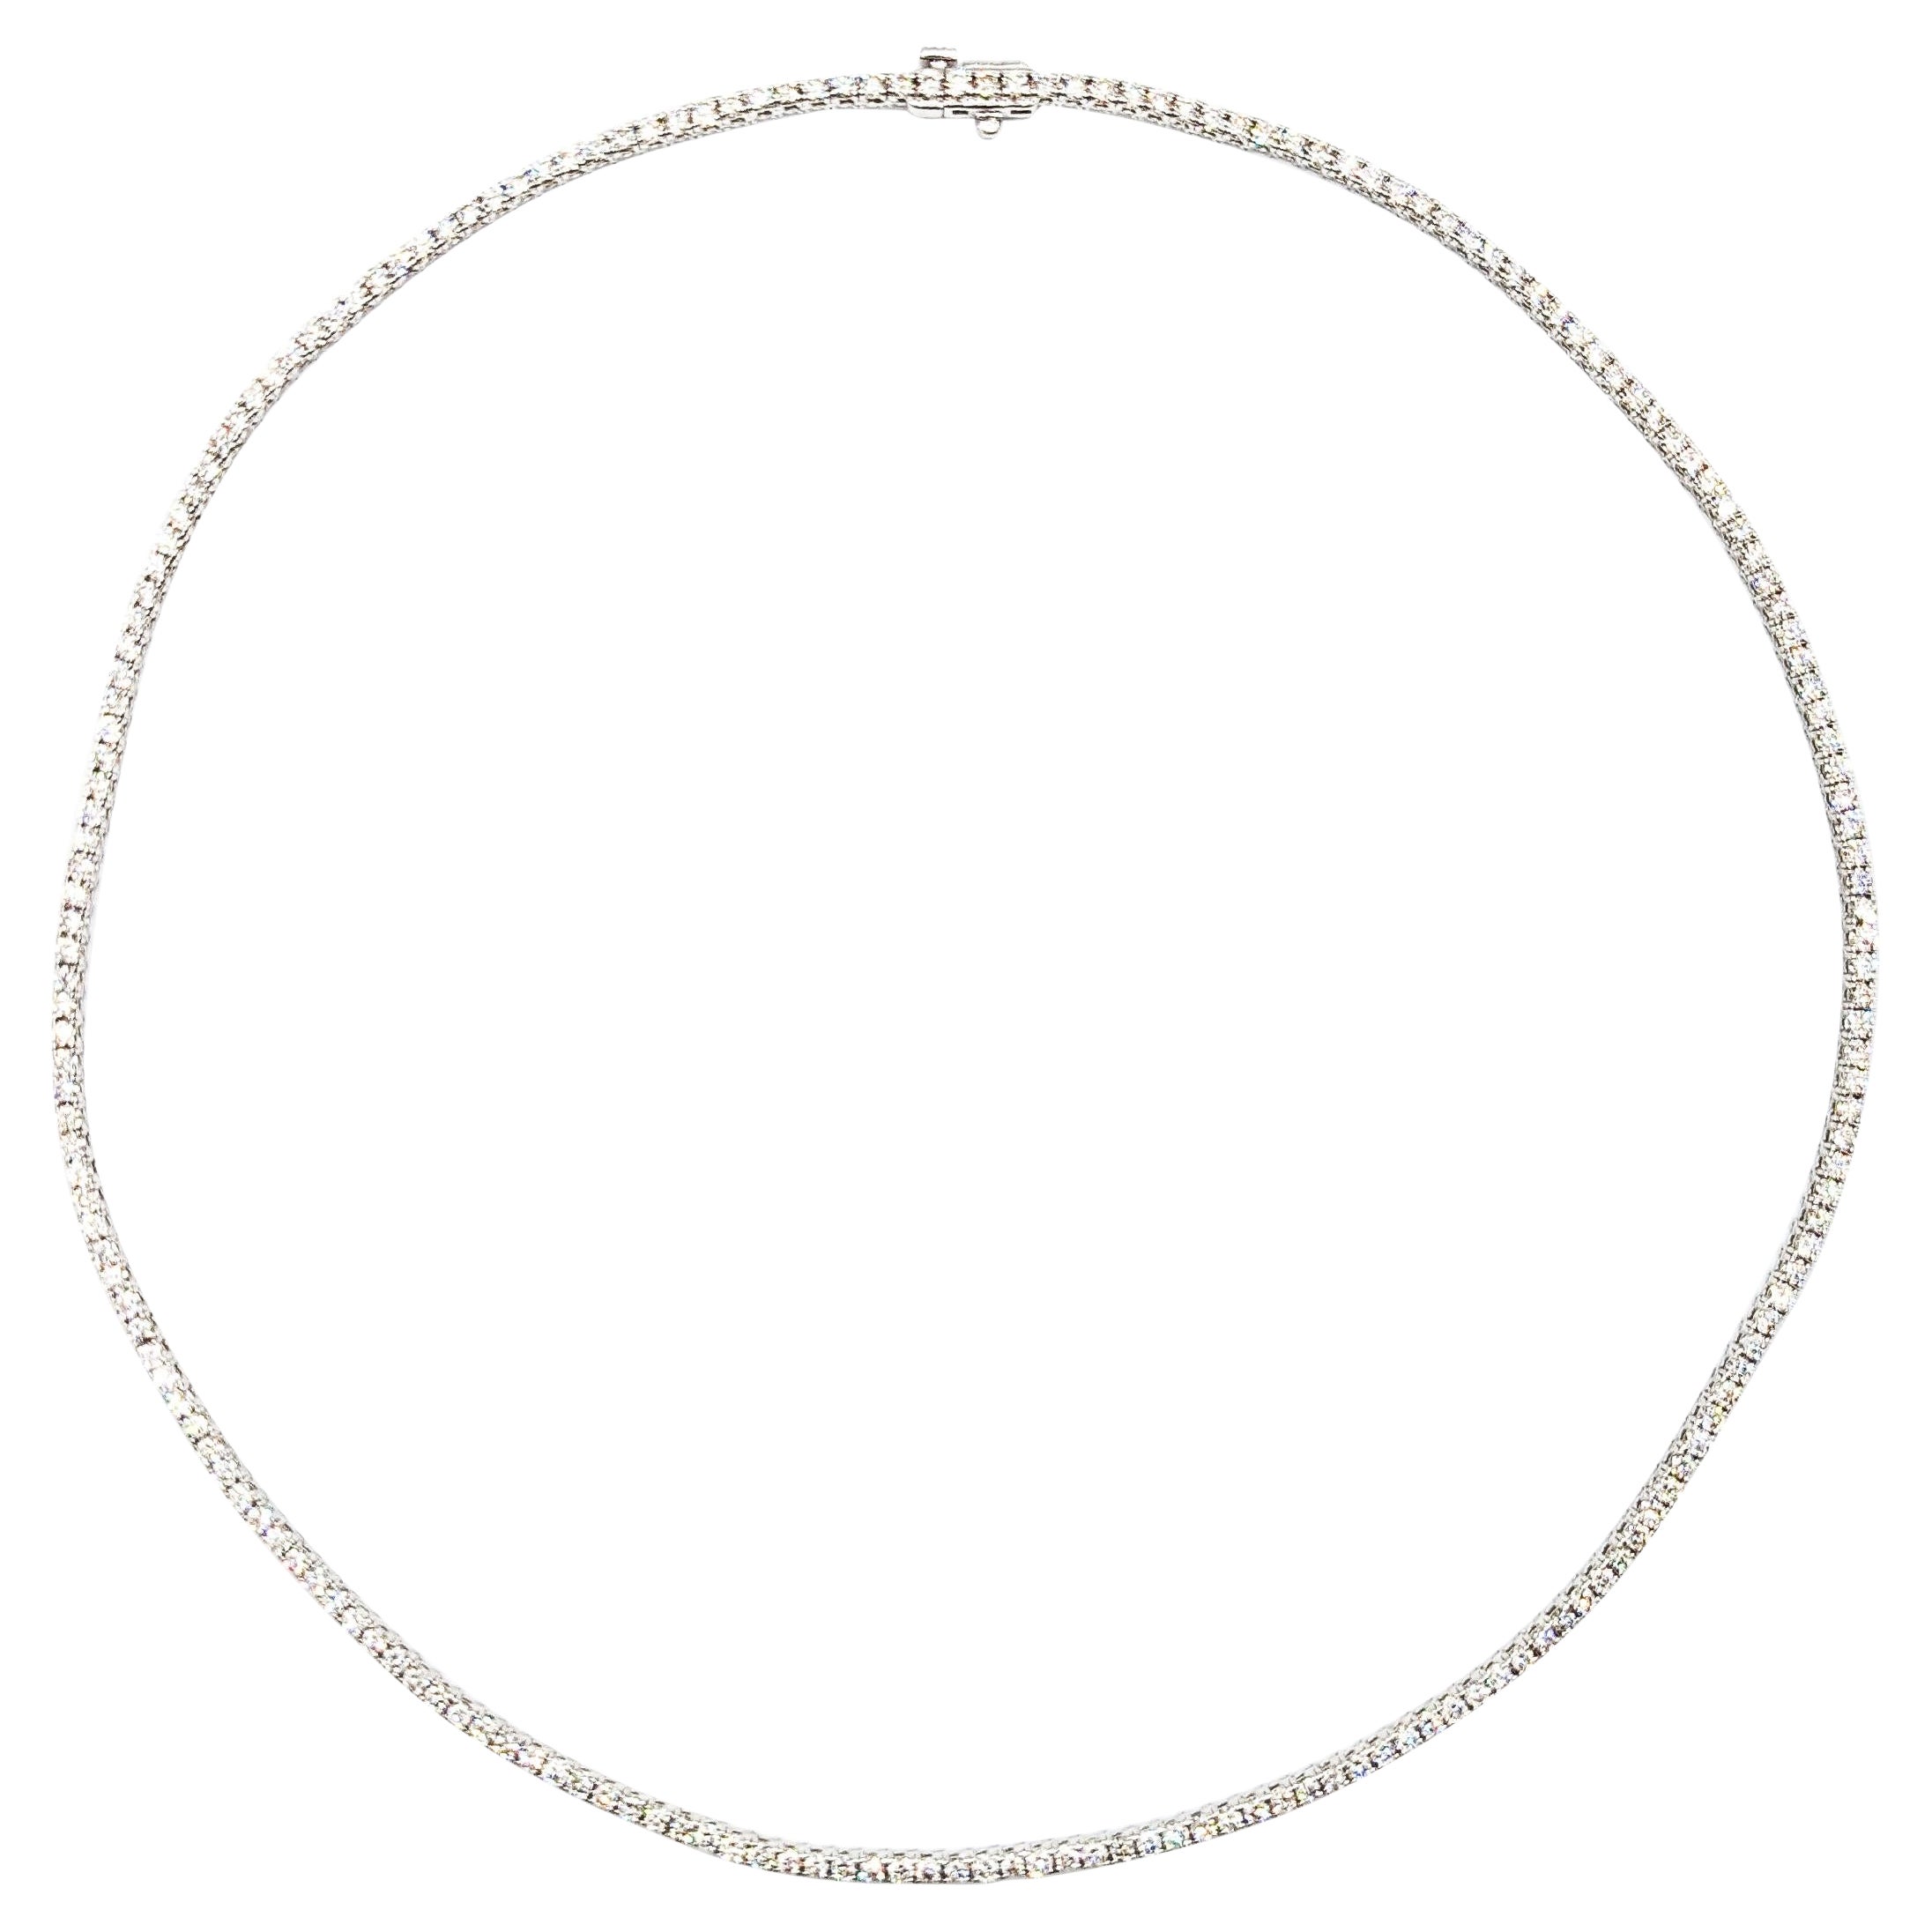 8ctw Diamond Tennis Necklace in White Gold